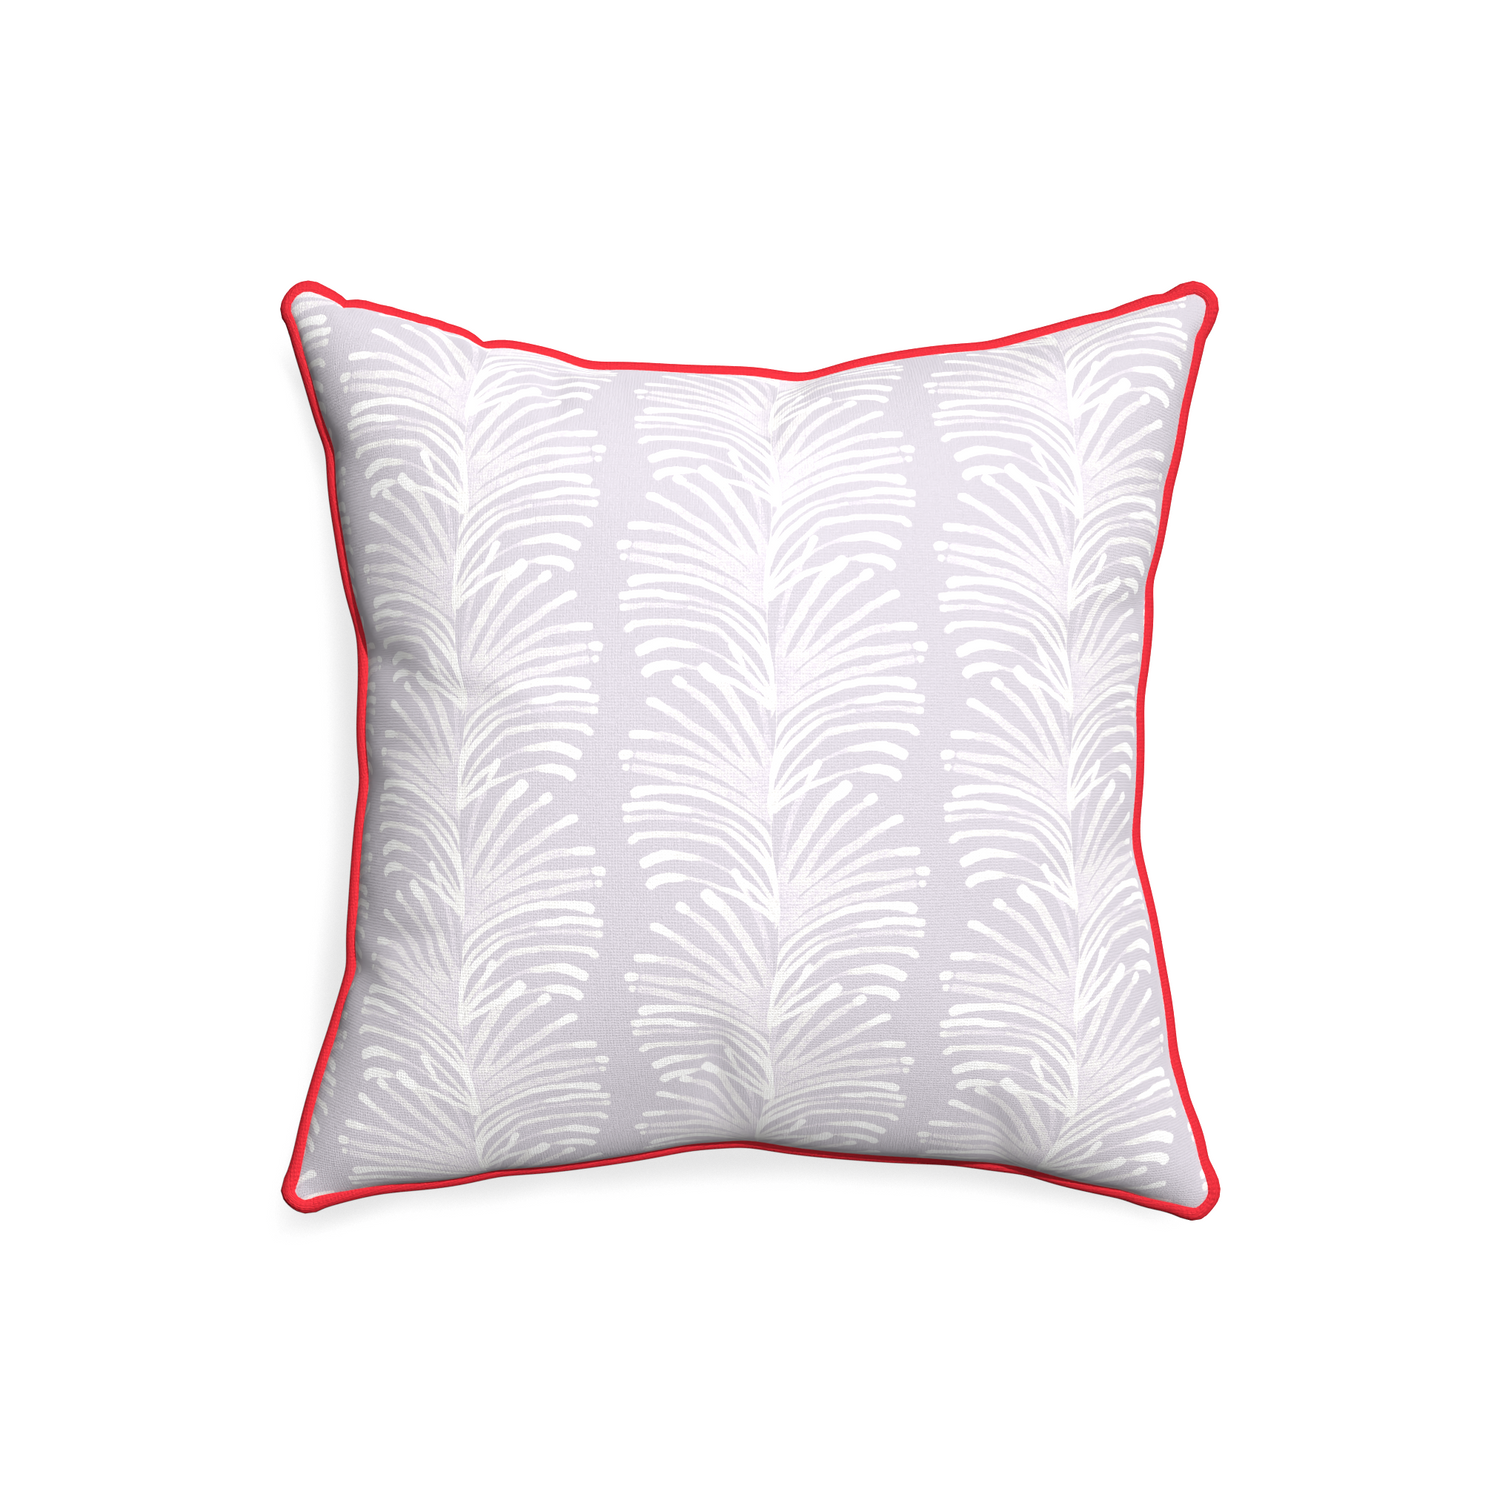 20-square emma lavender custom pillow with cherry piping on white background